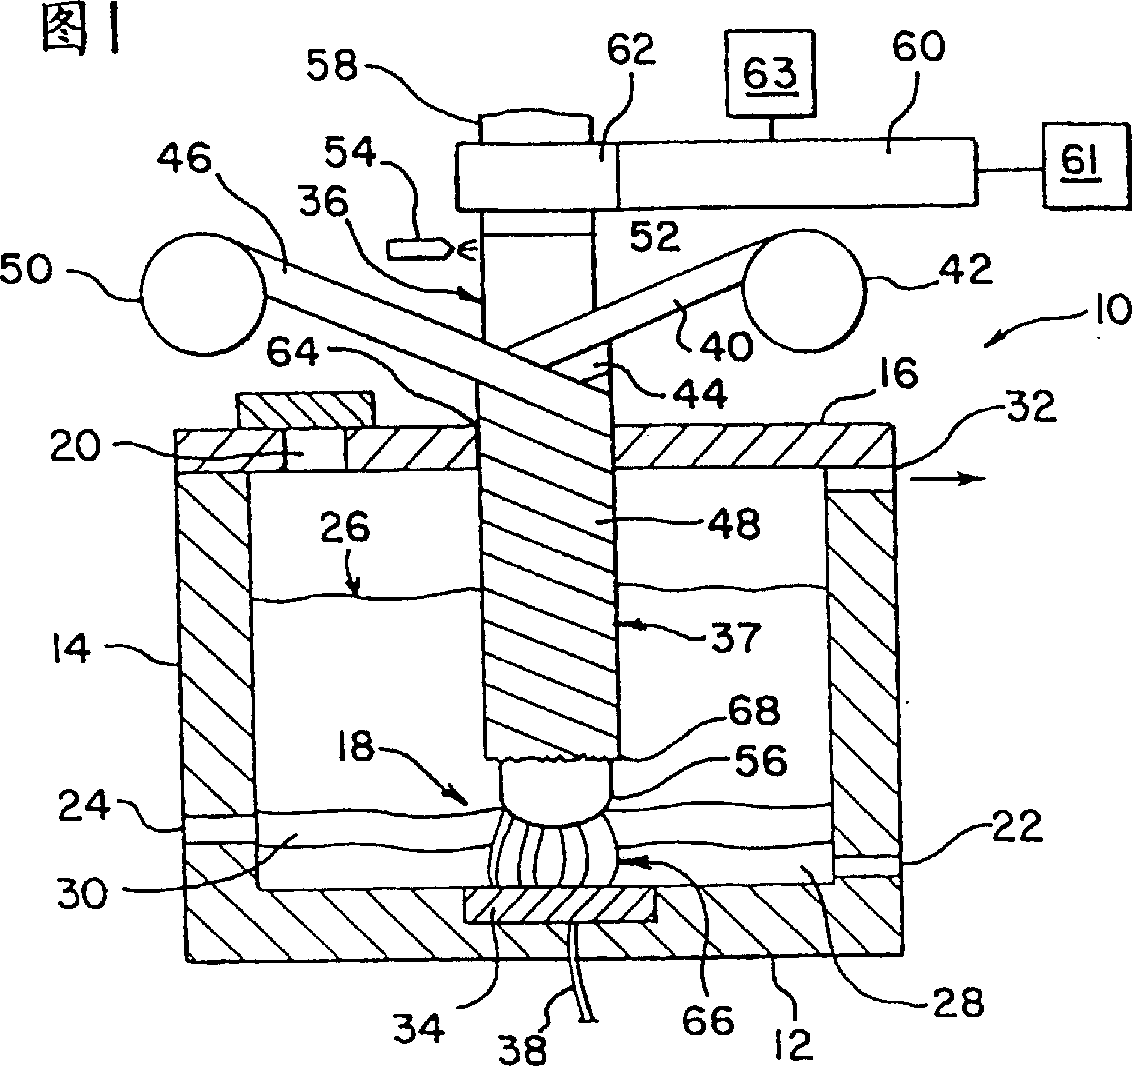 Electric furnace with insulated electrode and process for producing molten metals